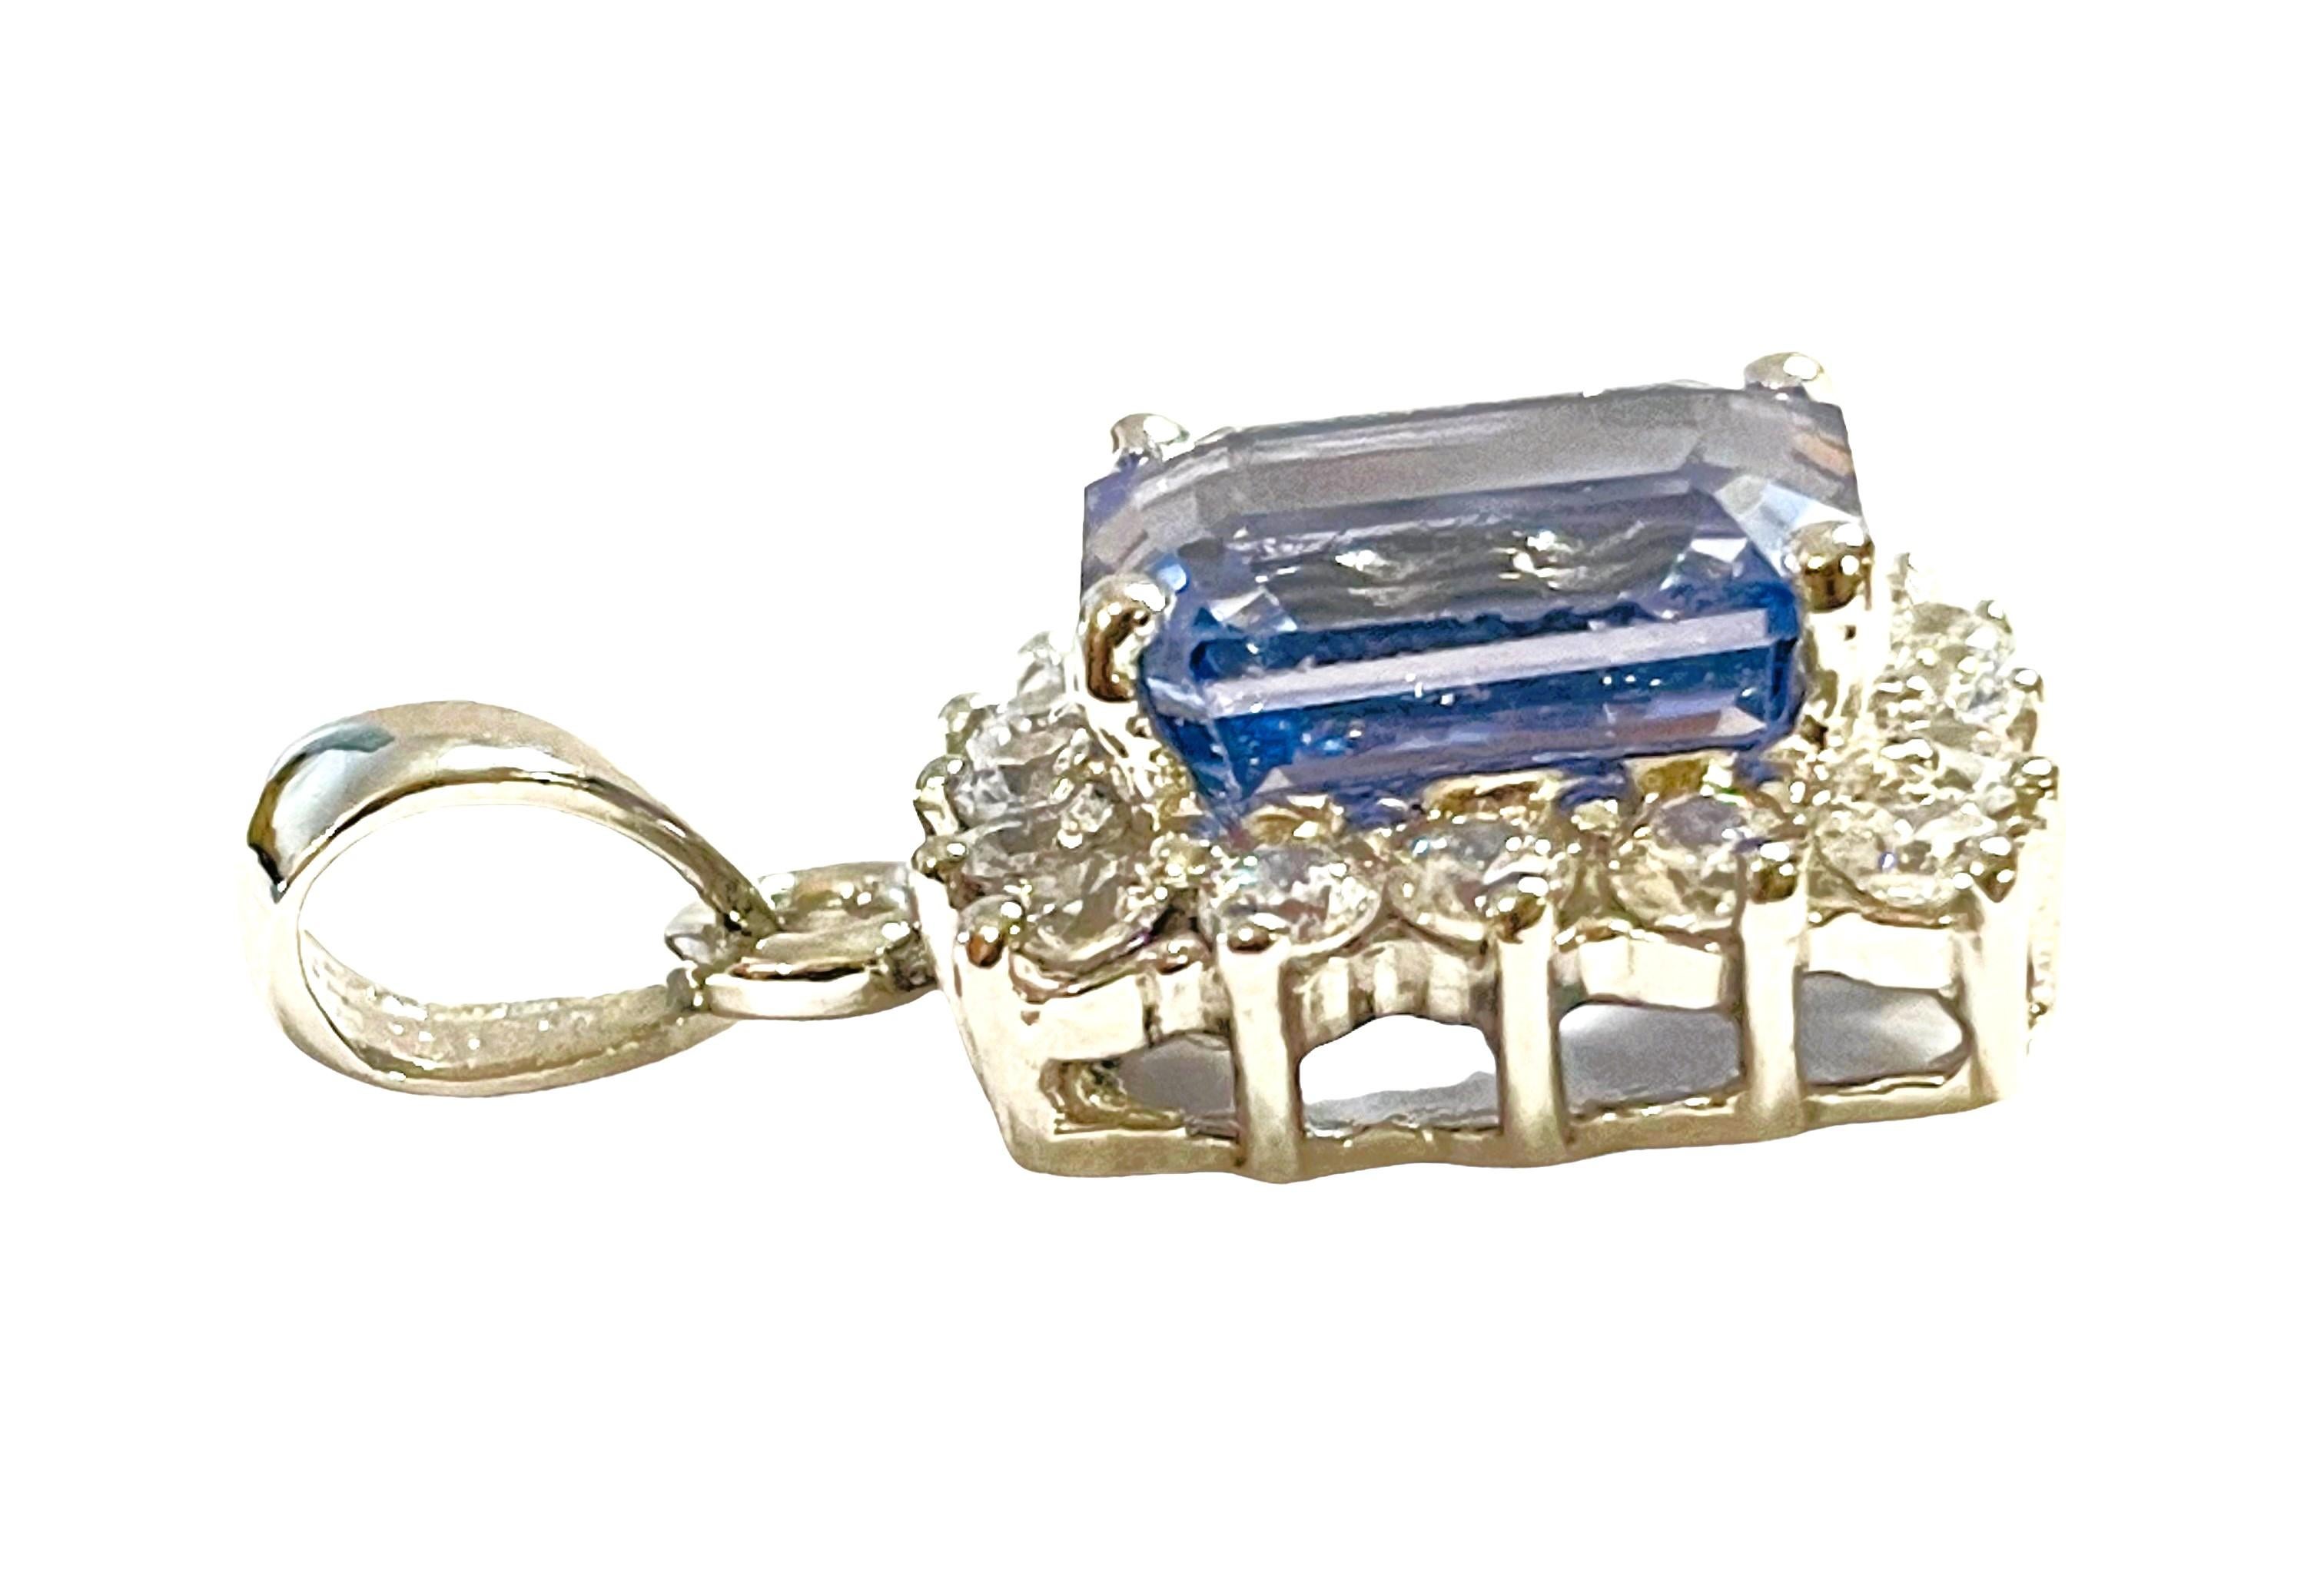 The Sapphire stone is was mined in Africa and is just exquisite. Cornflower blue is such a beautiful color..  It just shimmers and sparkles. The stone is an Emerald cut and measures 10 x 7.5 mm.  It is surrounded by White Diamond cut Sapphire